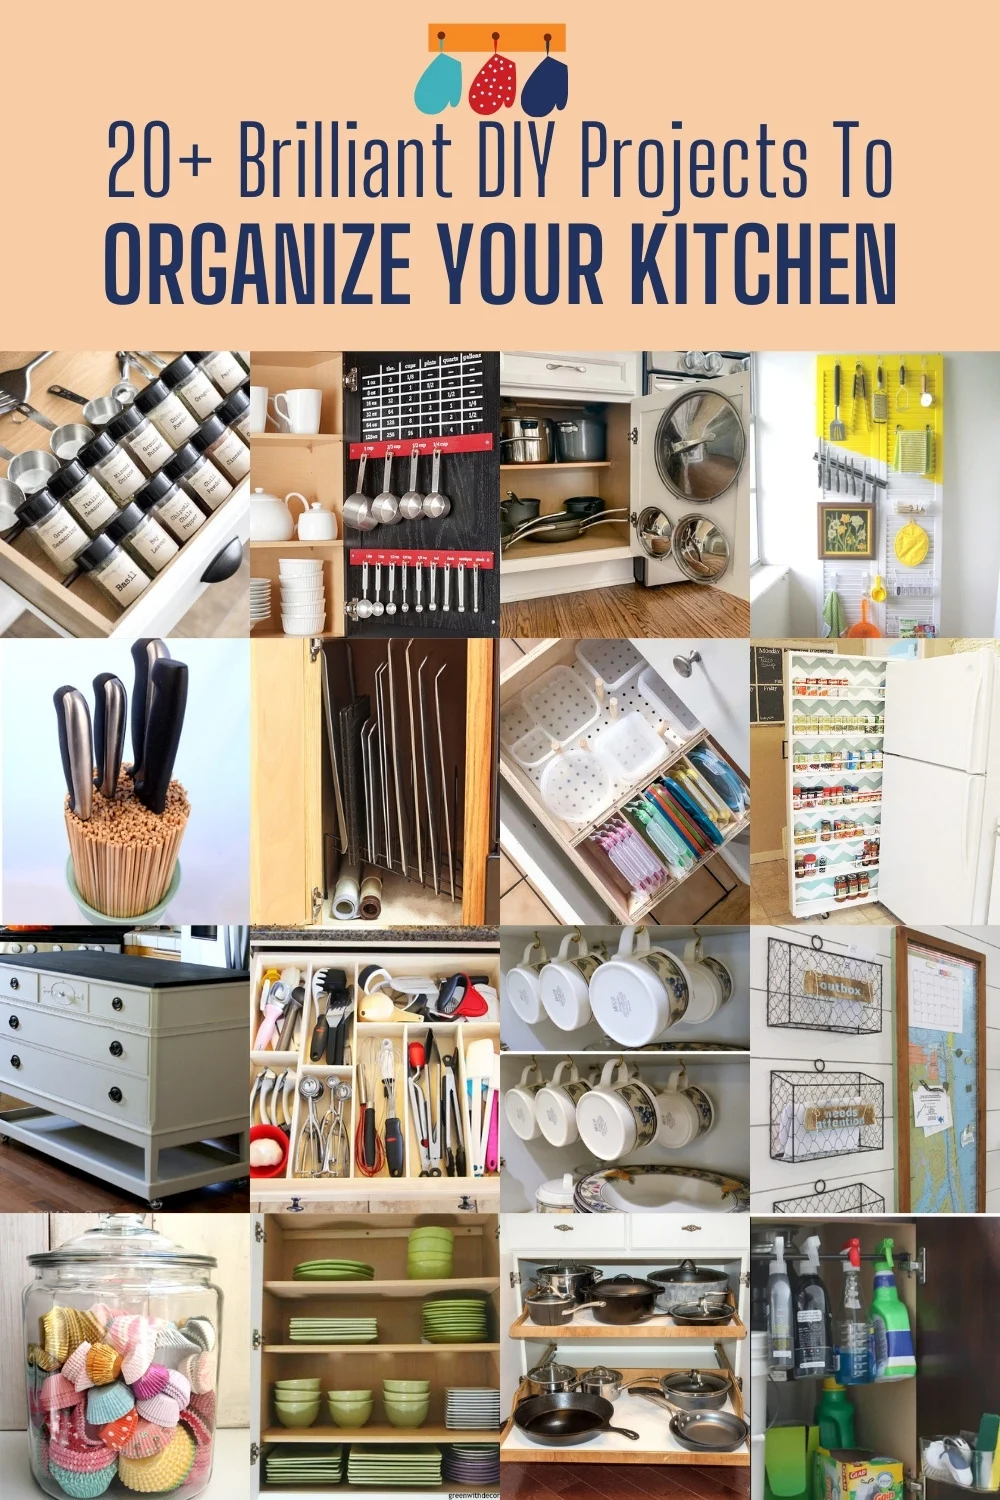 https://diycandy.b-cdn.net/wp-content/uploads/2021/10/Organize-Your-Kitchen-with-these-brilliant-DIY-project.jpg.webp